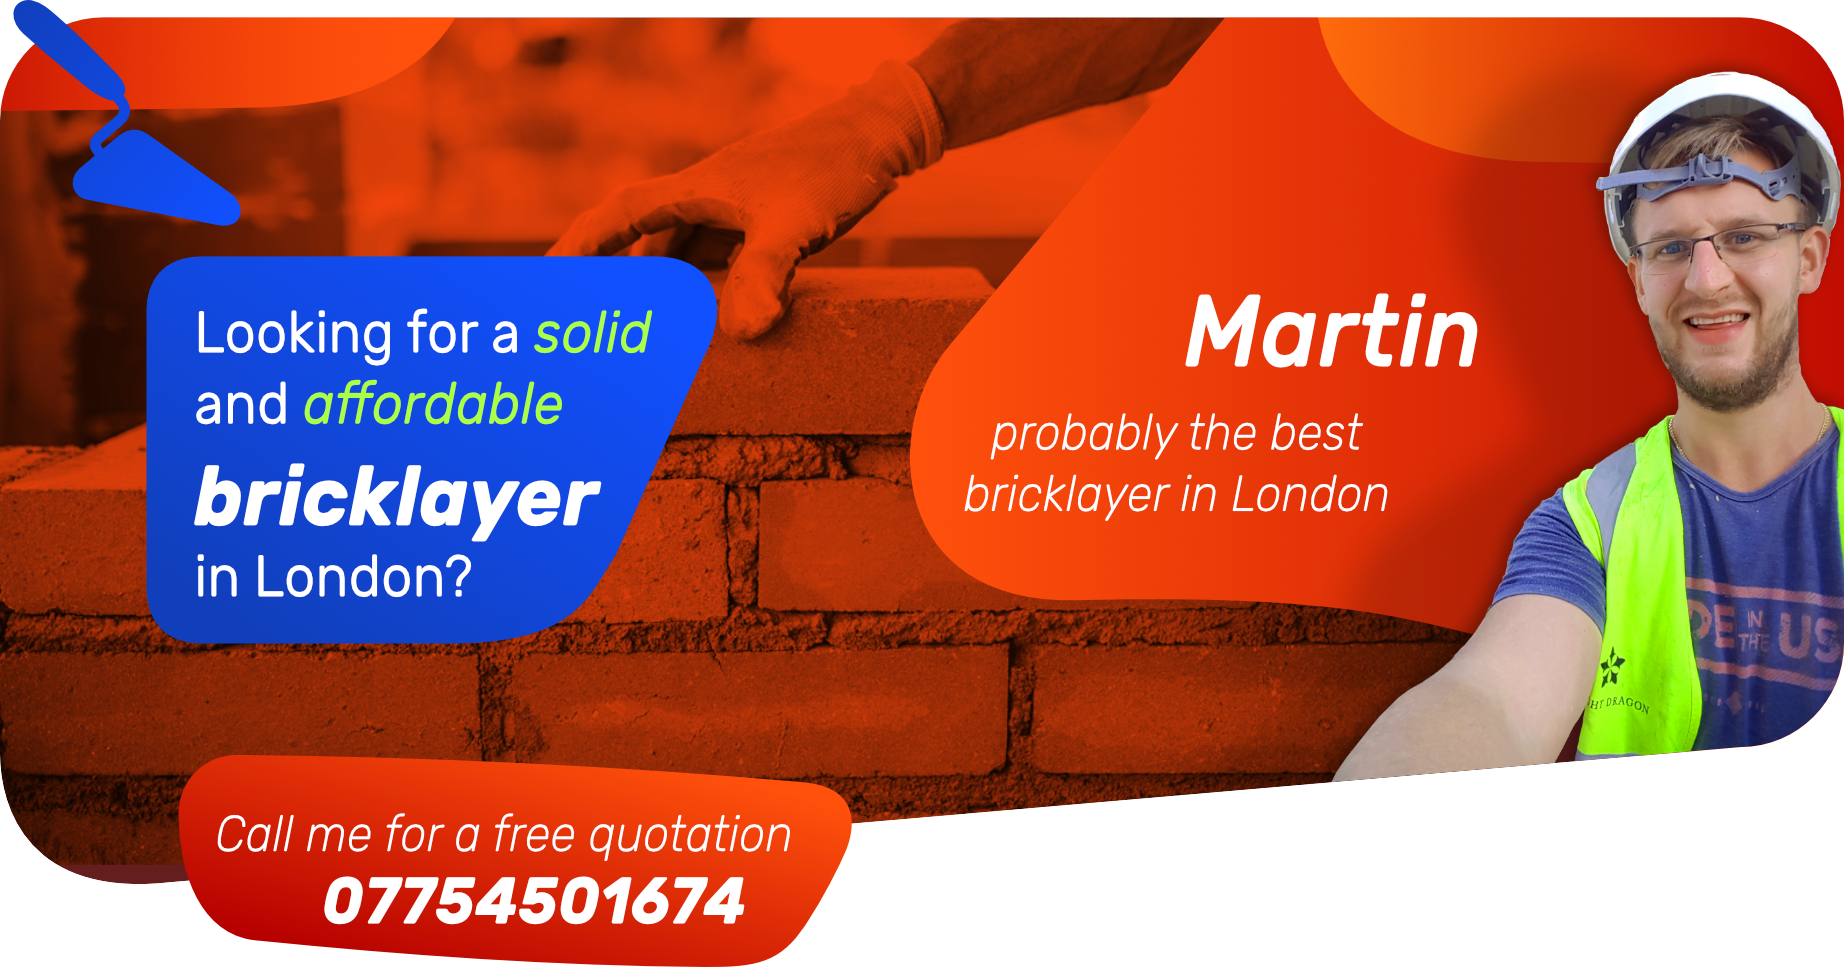 Martin the best bricklayer in London